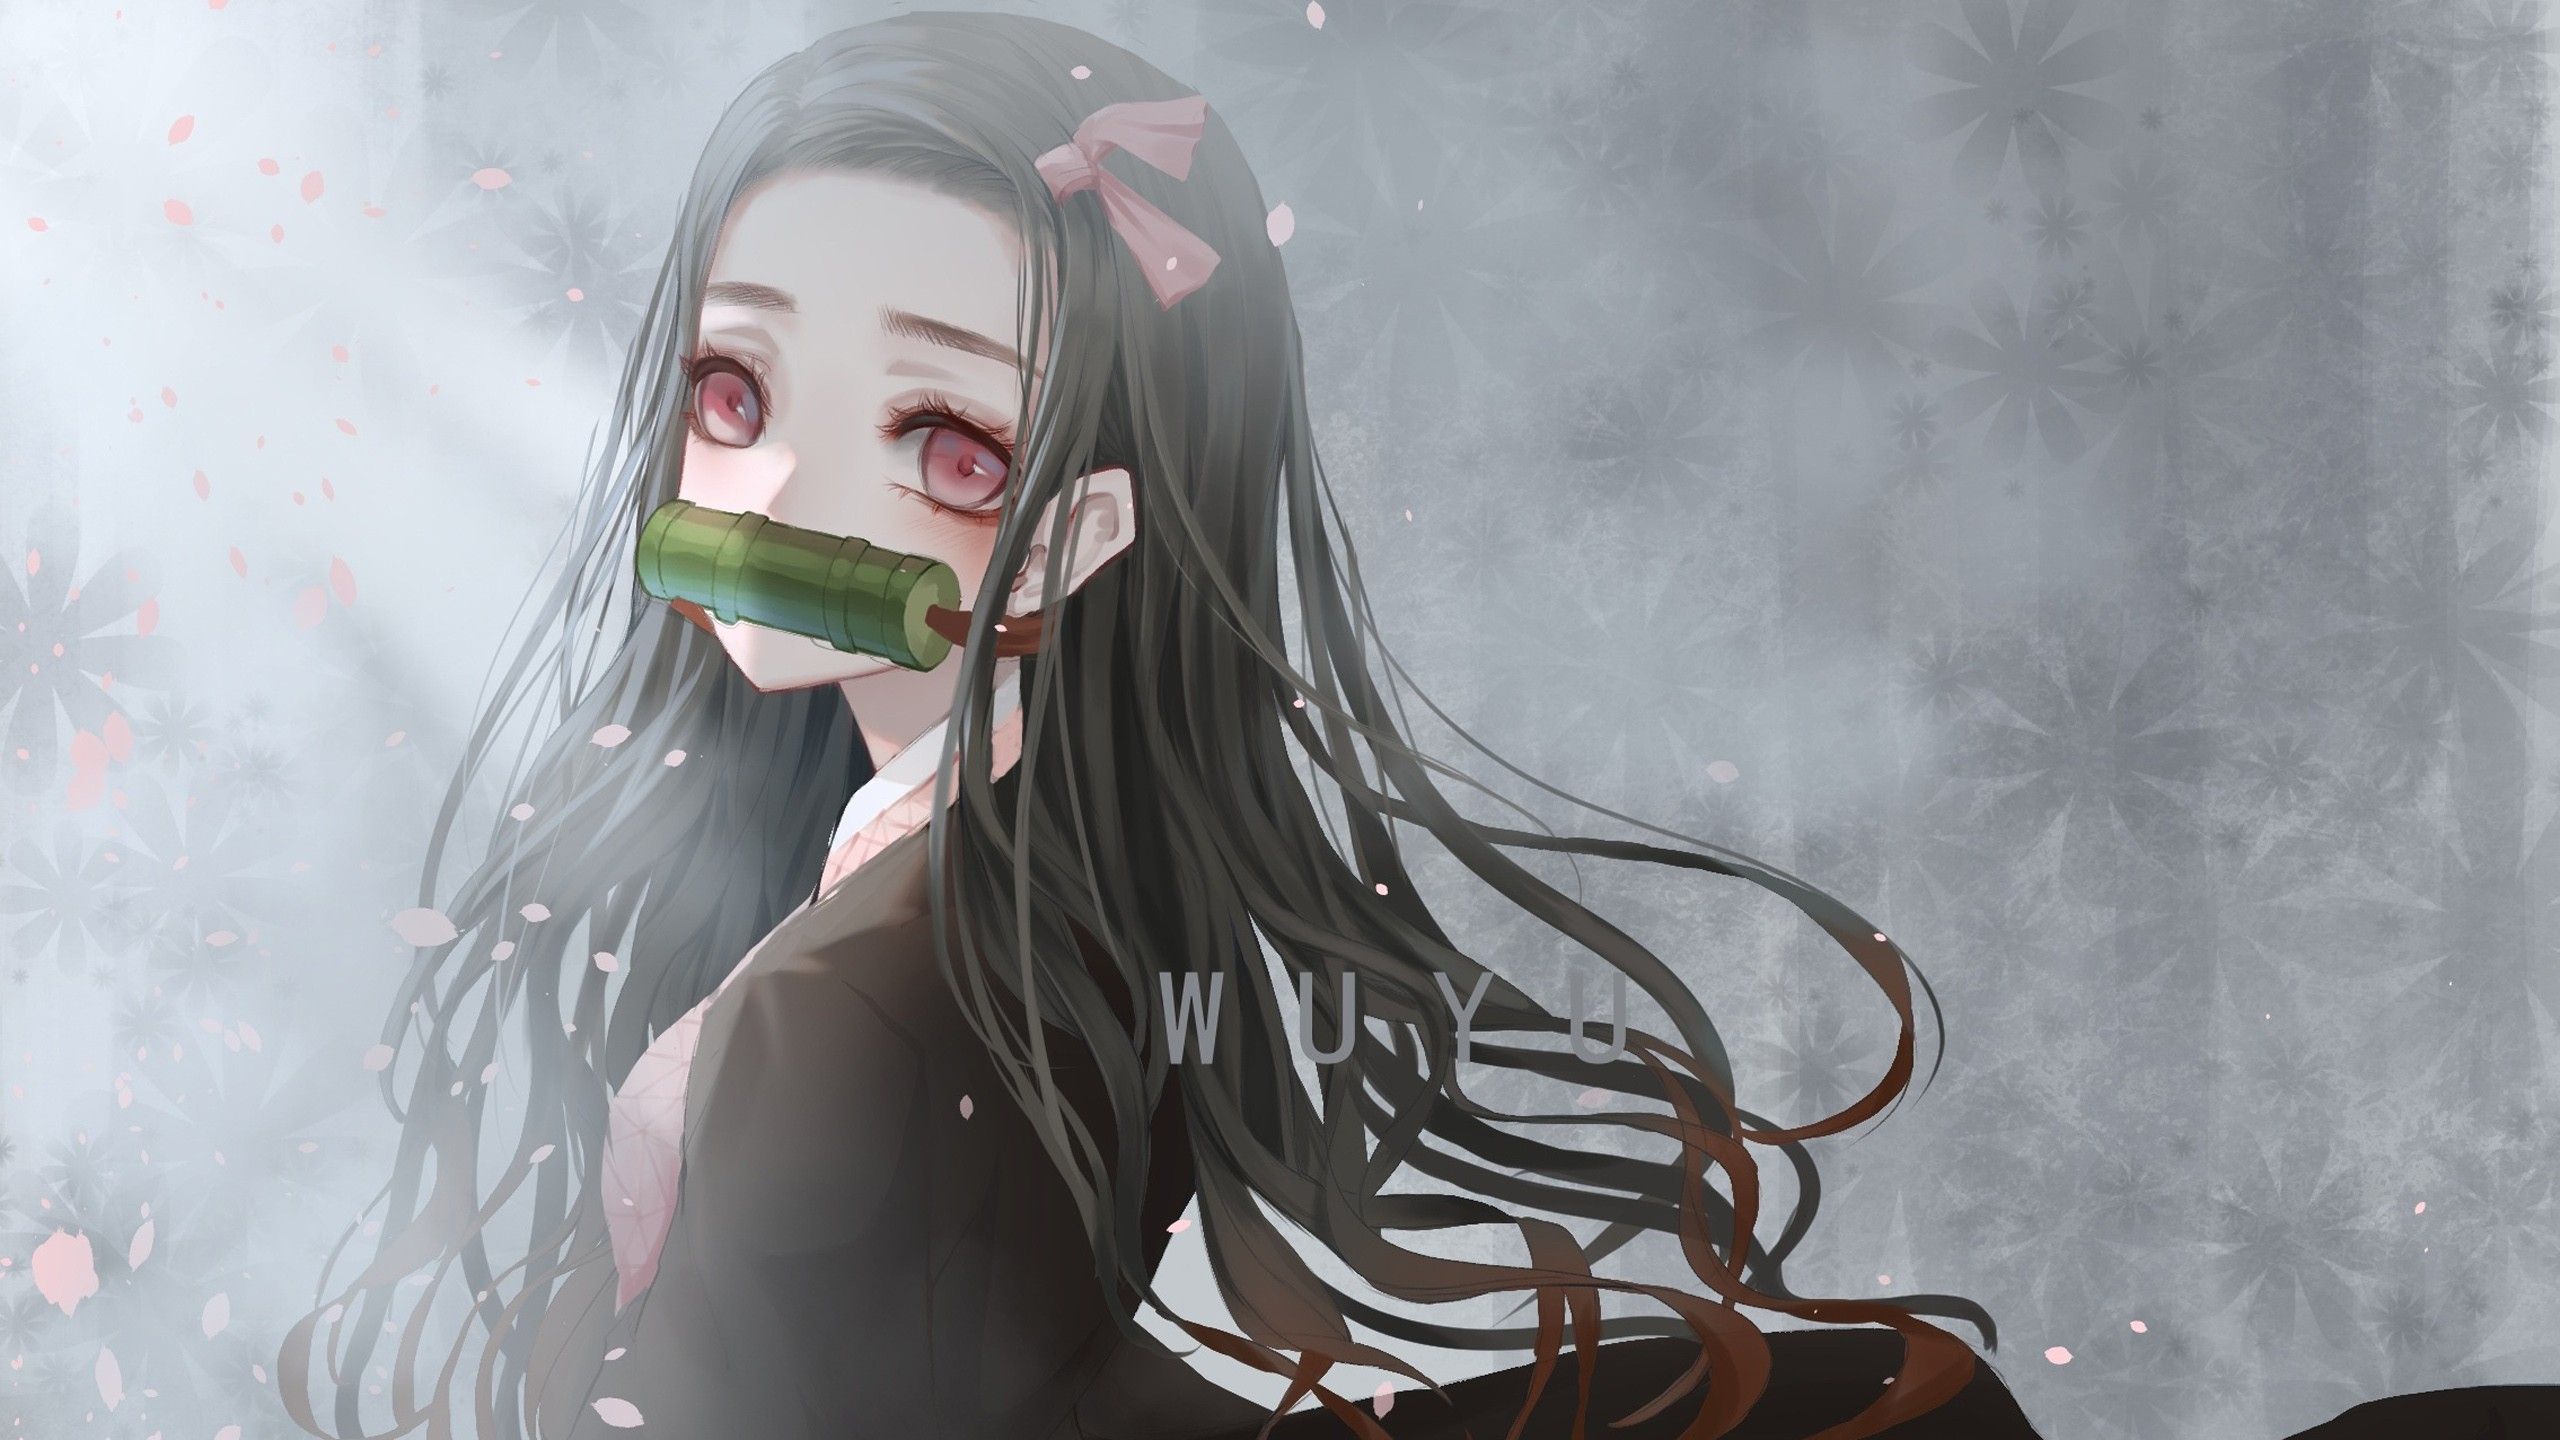 Demon Slayer Nezuko Kamado With Long Hair And Pink Eyes With Background Of Gray Abstract HD Anime Wallpaper